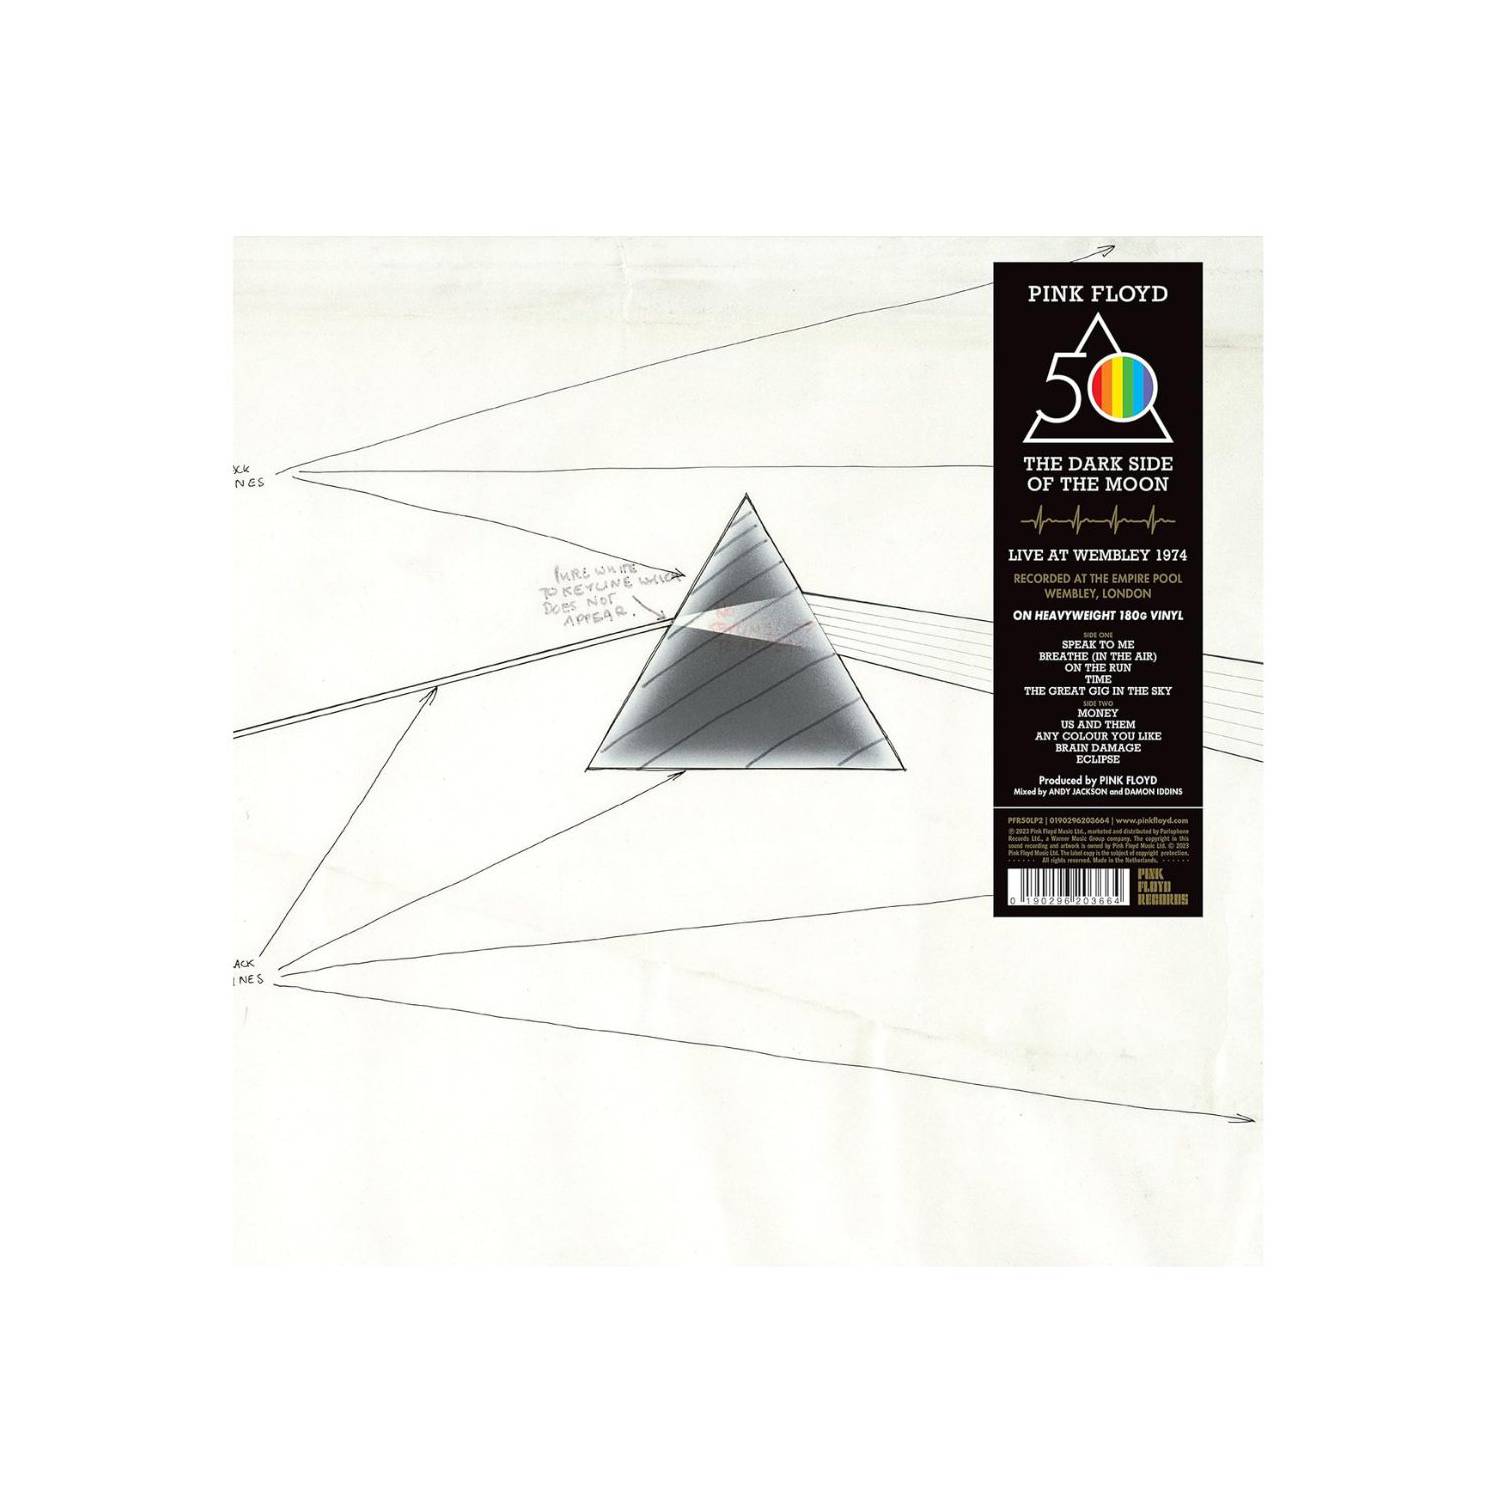 HITWAY MUSIC PINK FLOYD - DARK SIDE OF THE MOON LIVE AT WEMBLEY - VINILO